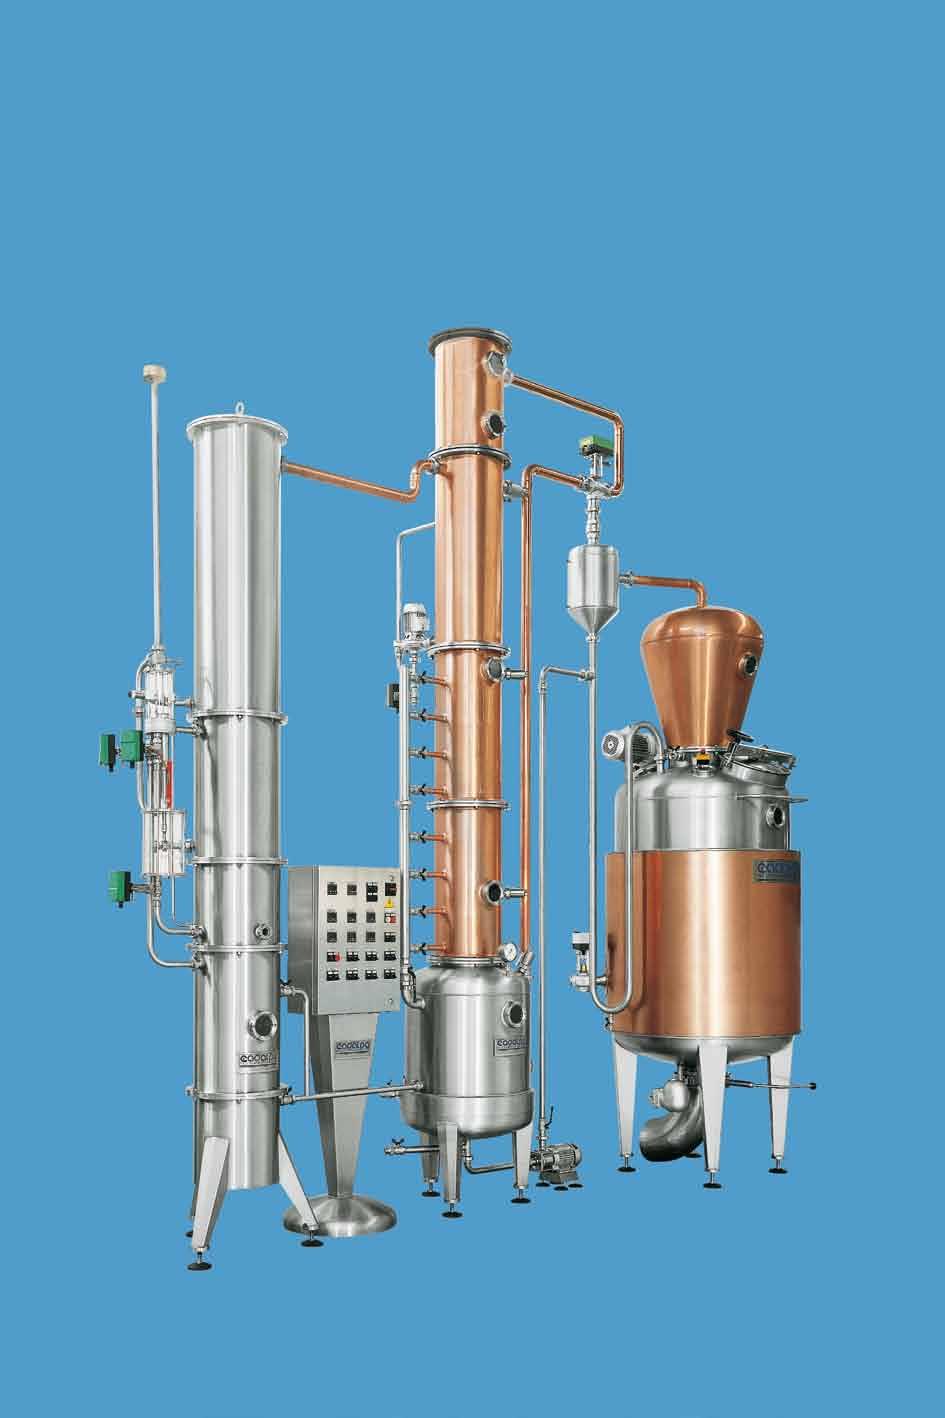 Batch still Only top quality distillates Specialising in the most reliable and efficient distilling, the batch still is designed for medium to small sized distilleries that produce top quality